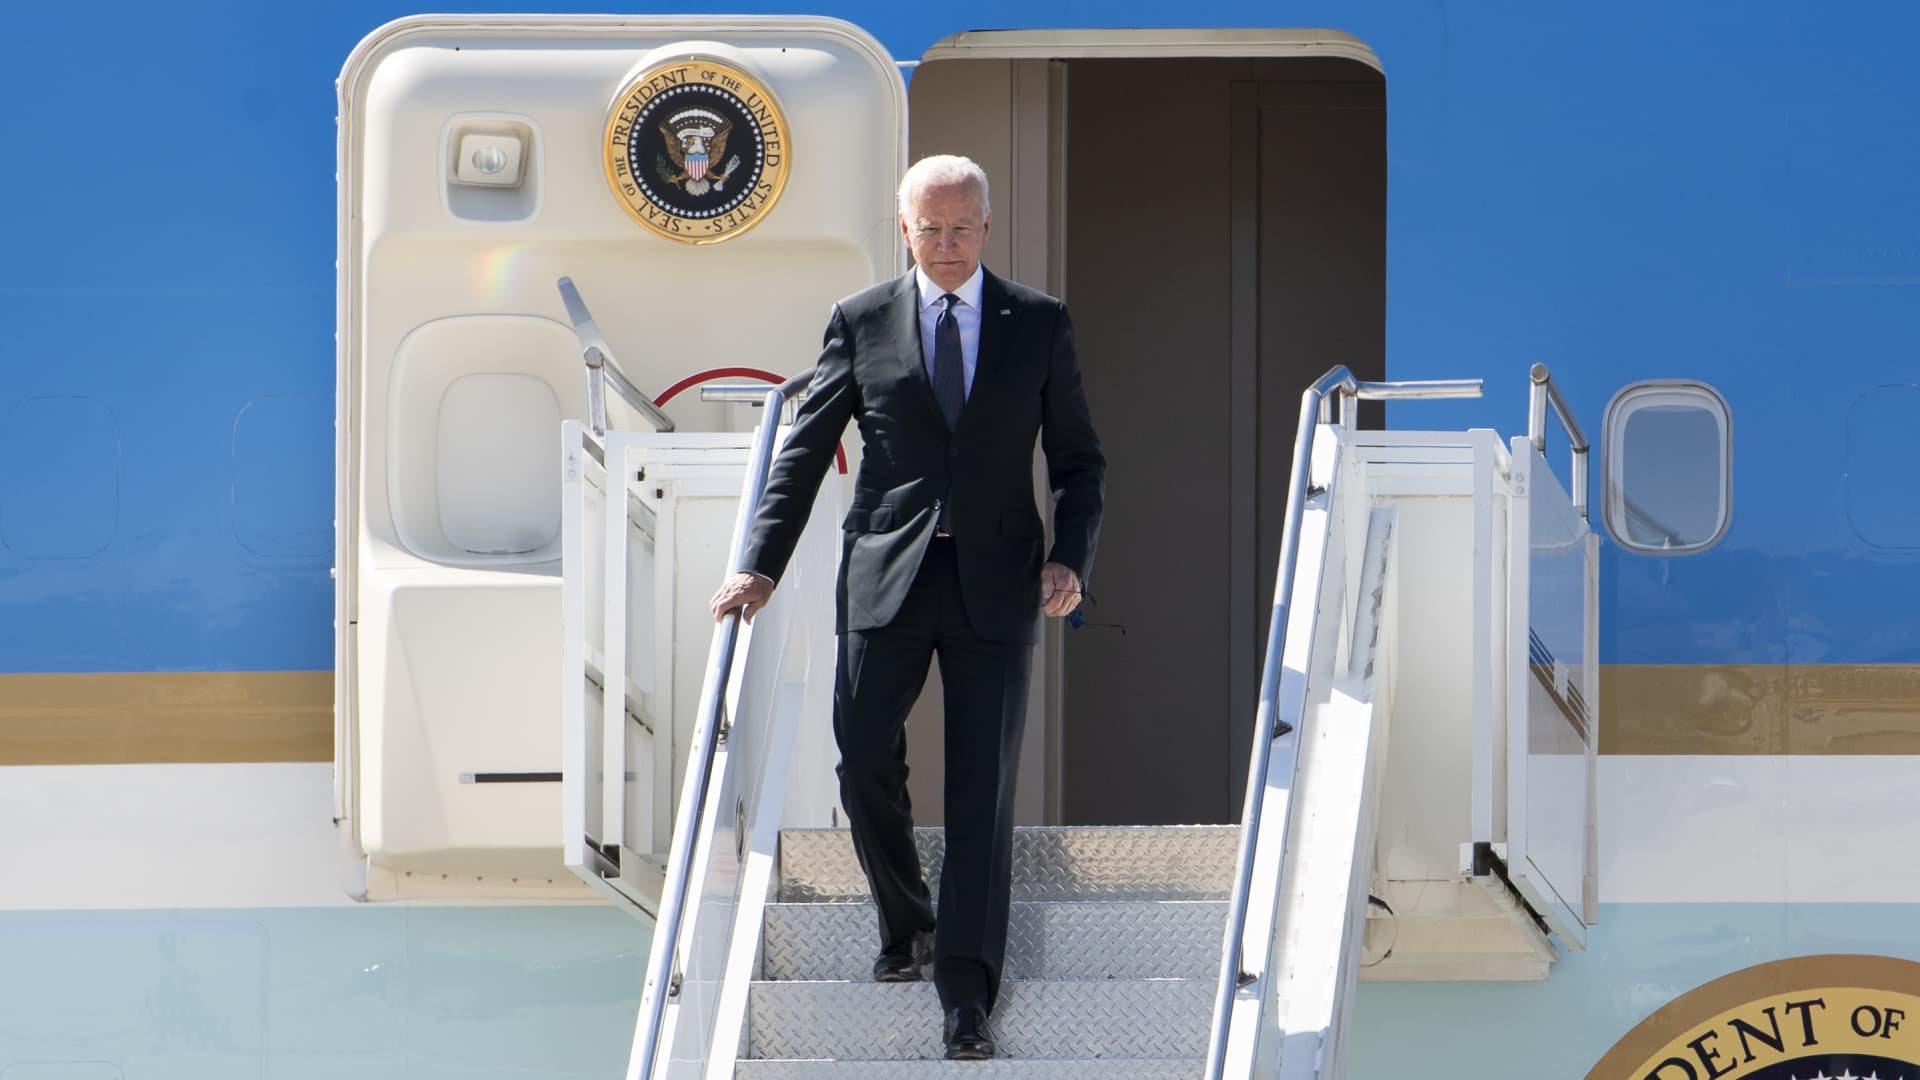 U.S. president Joe Biden disembarks from Airforce One after arriving in Geneva, one day prior to the U.S. - Russia summit.